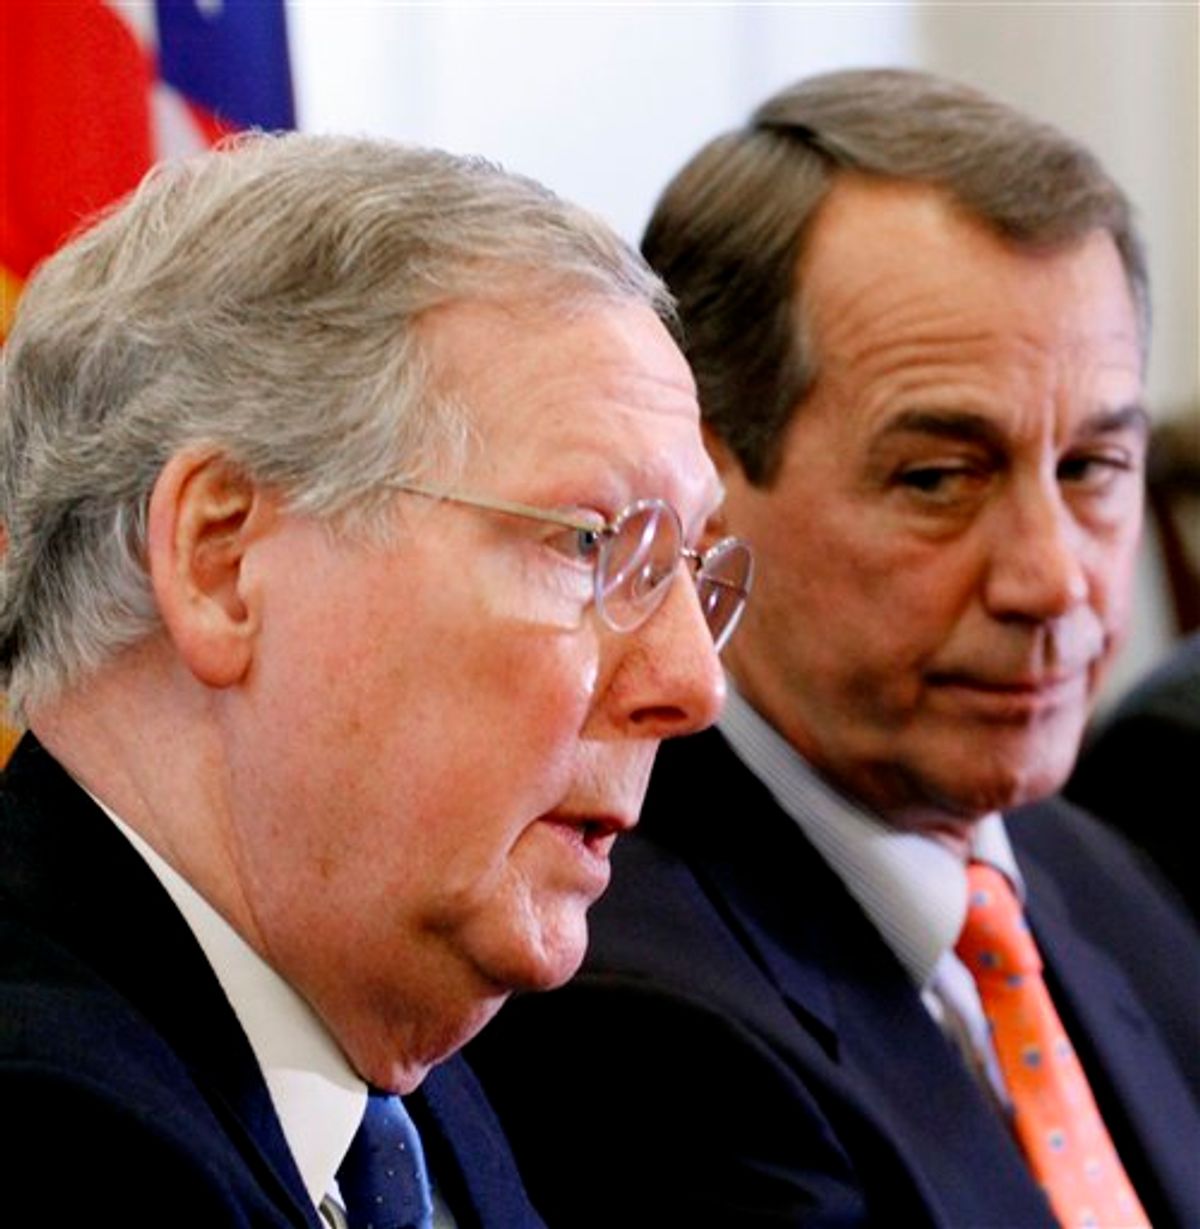 Senate Minority Leader Mitch McConnell of Ky., accompanied by House Minority Leader John Boehner of Ohio speaks during a news conference on Capitol Hill in Washington,  Tuesday, Nov. 30, 2010, after their meeting with President Barack Obama. (AP Photo/Harry Hamburg)  (AP)